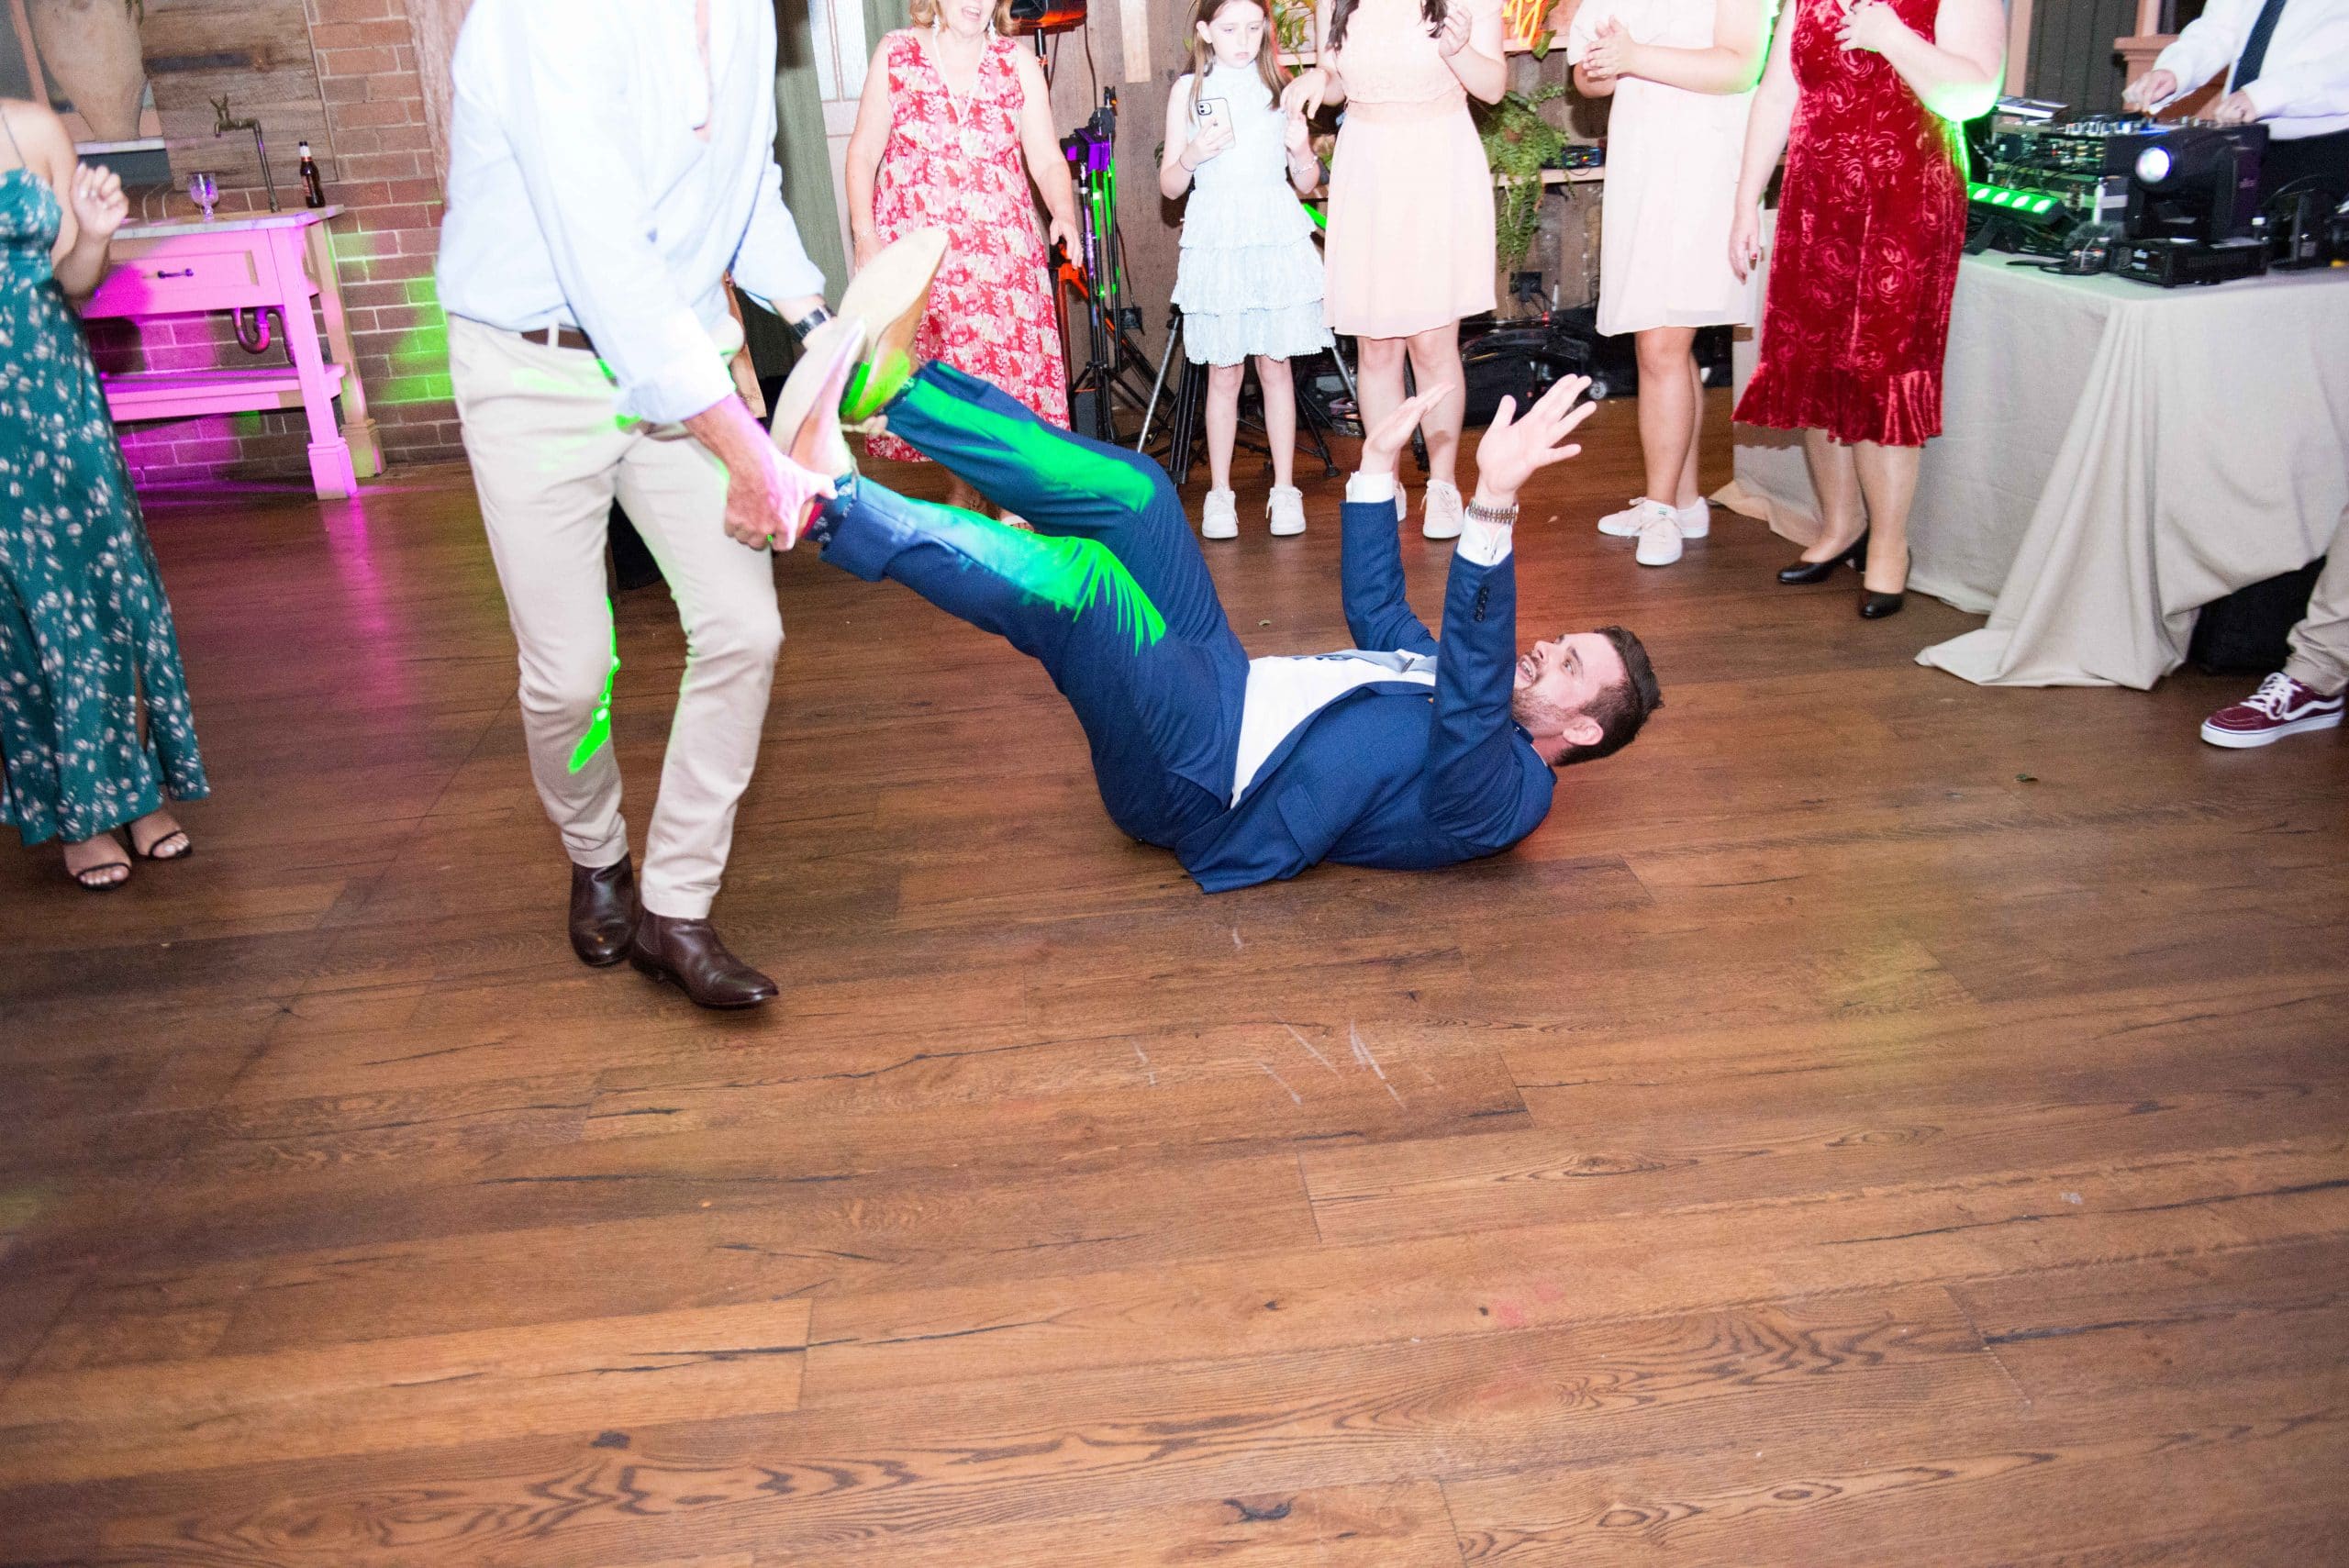 Nathan being dragged on the floor by his legs on the dancefloor